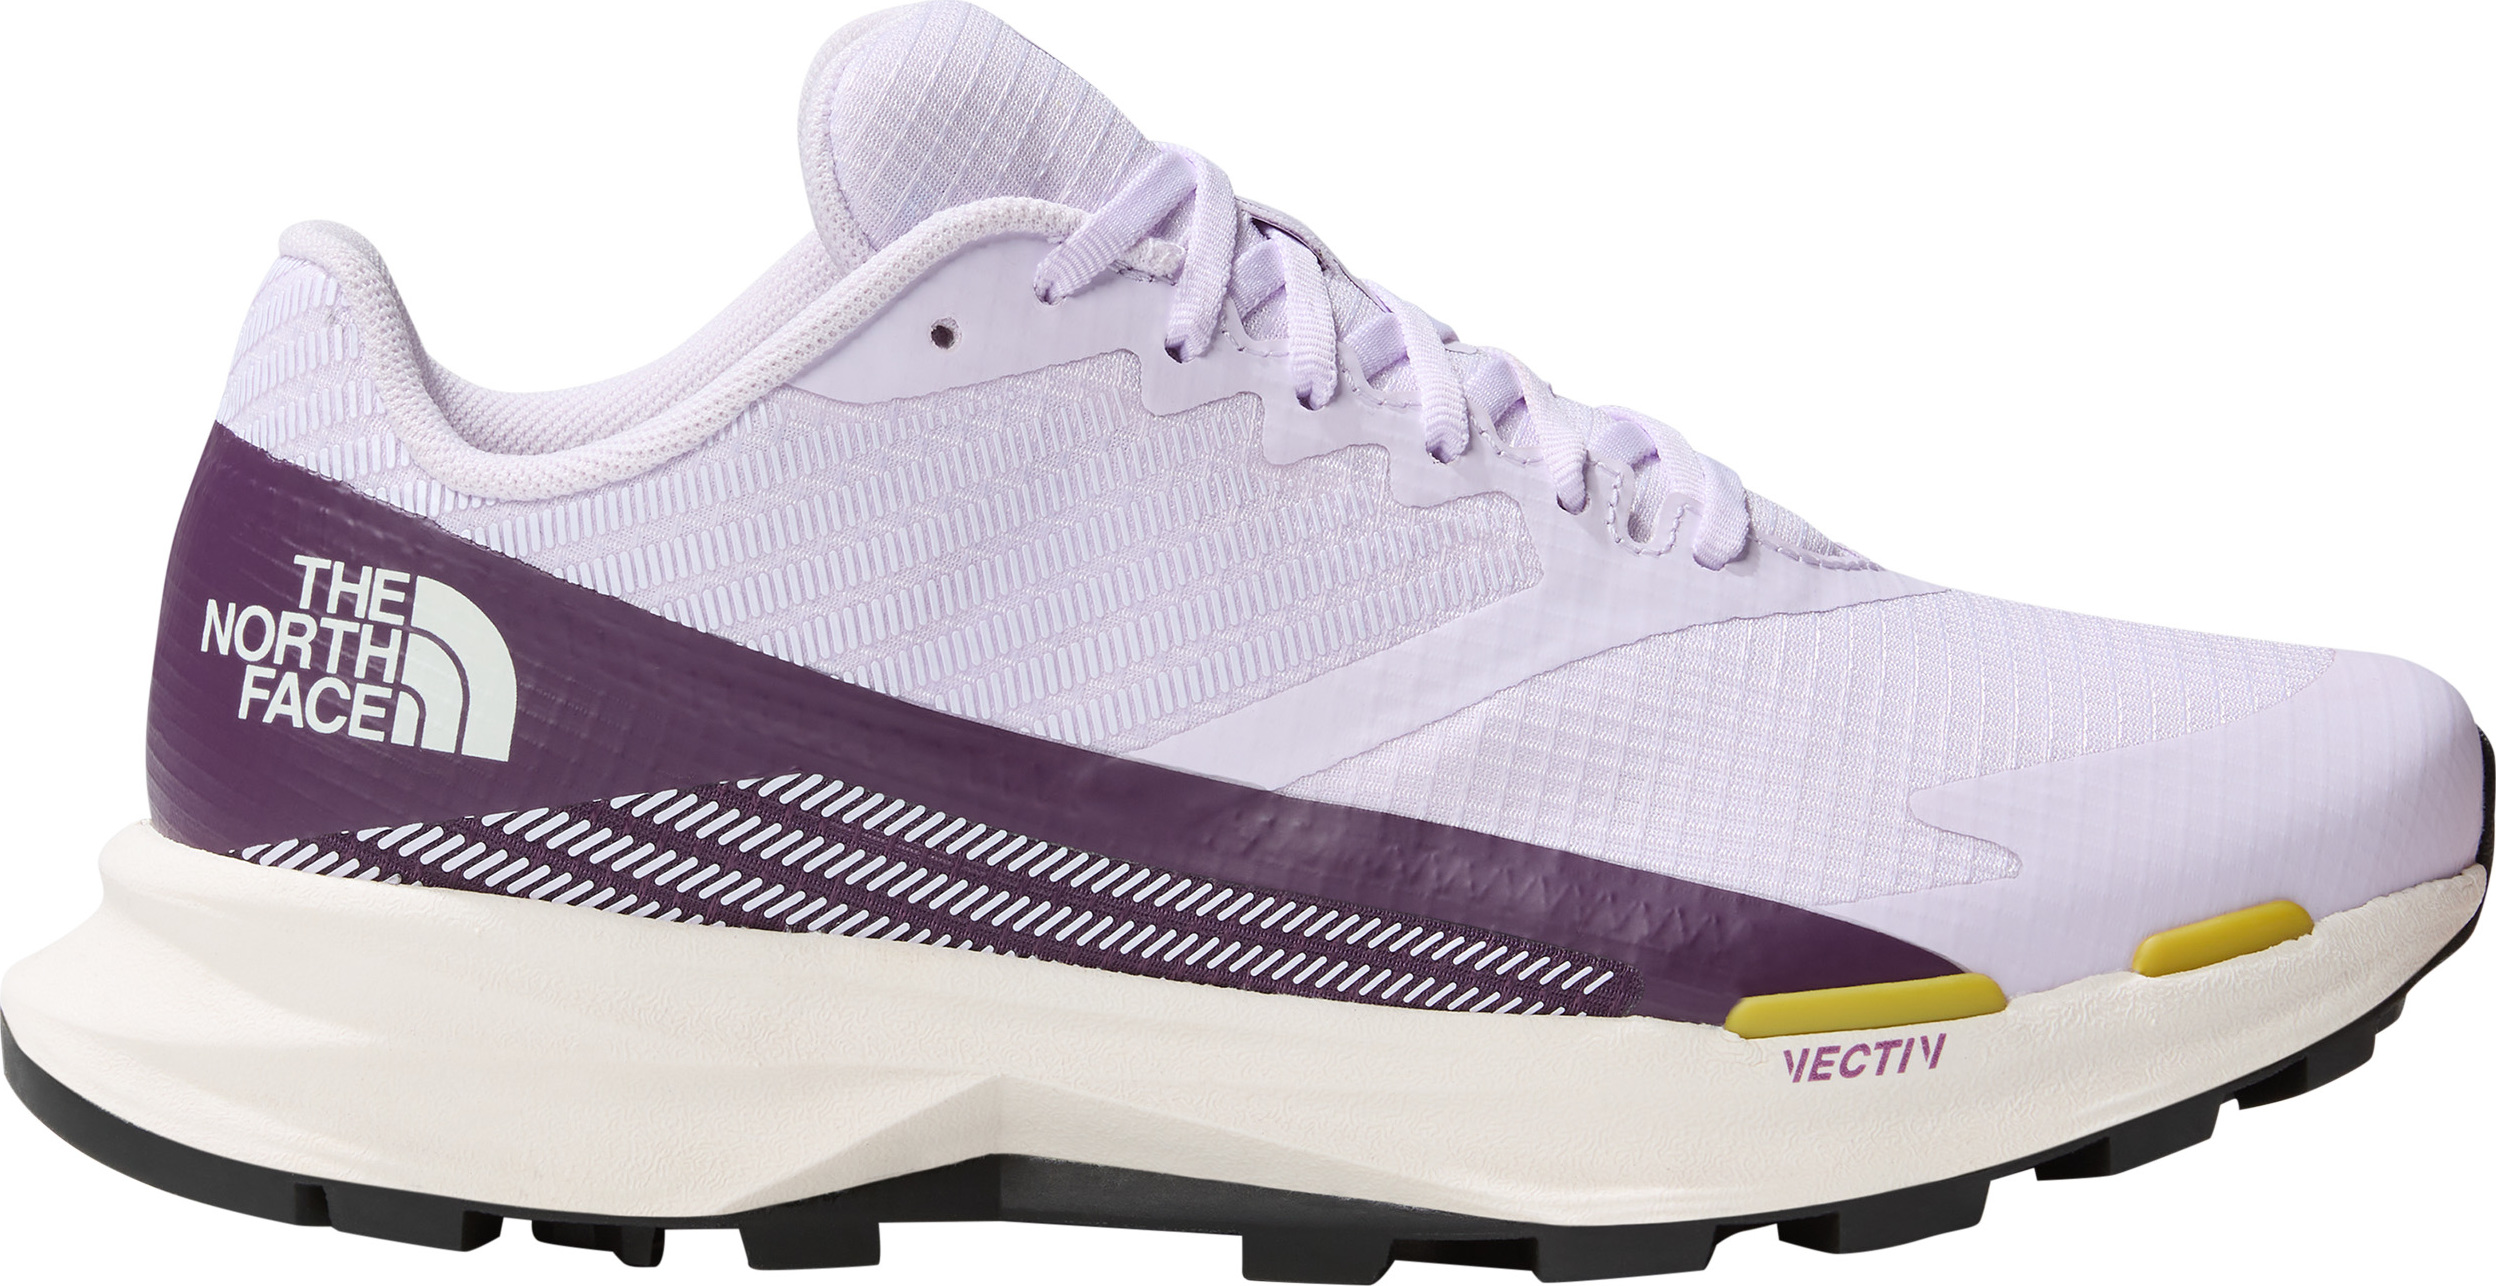 The North Face The North Face Women's VECTIV Levitum Icy Lilac/Black Currant 41, Icy Lilac/Black Currant